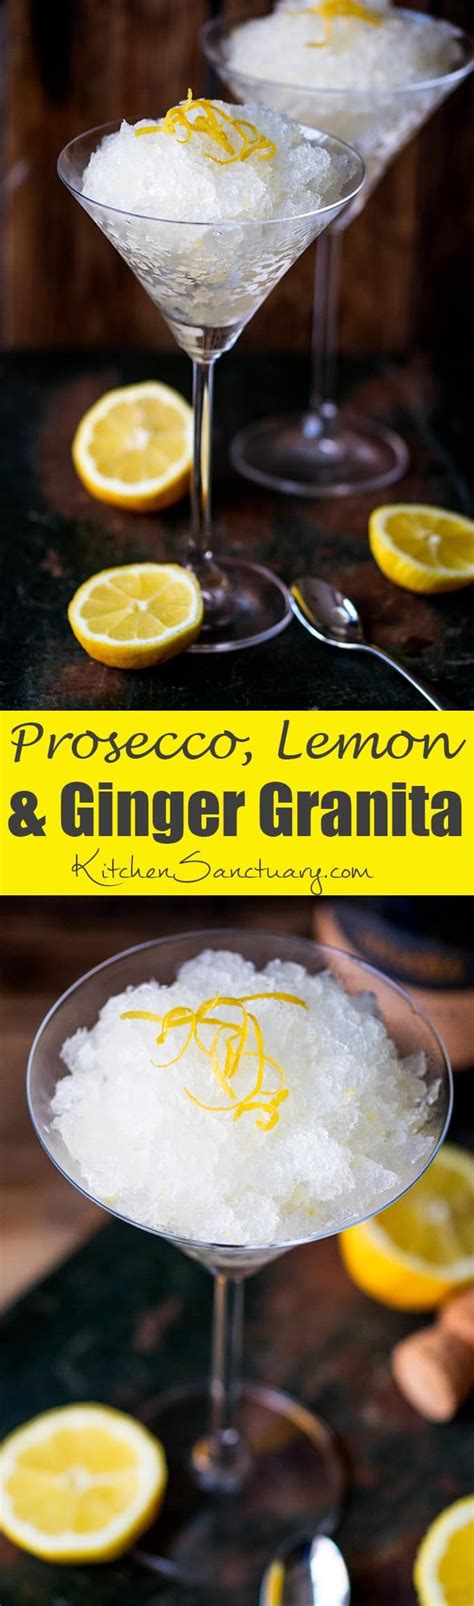 Prosecco Lemon And Ginger Sorbet A Seriously Refreshing Boozy Dessert